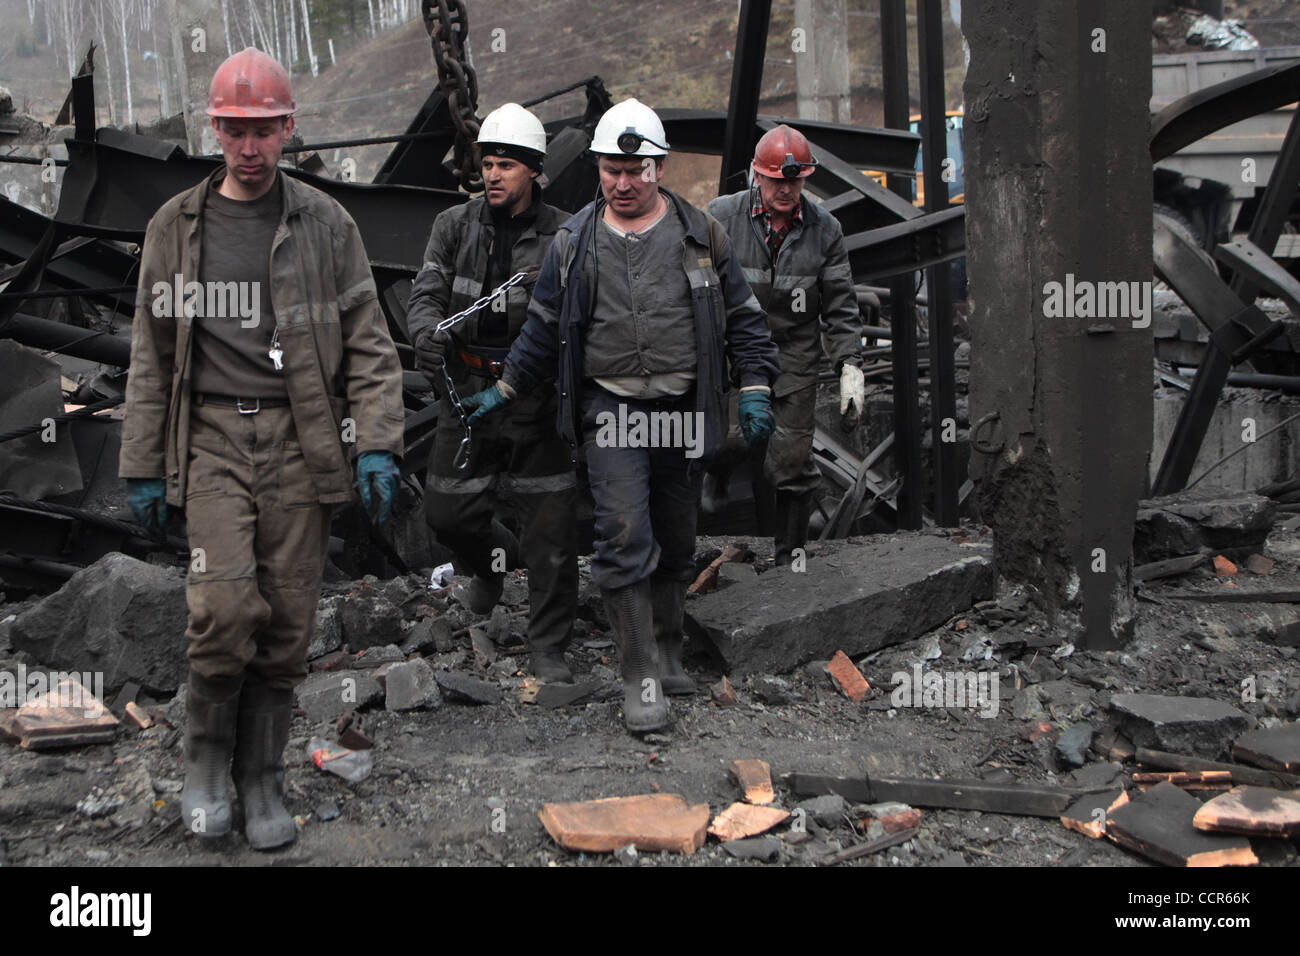 Death toll at Raspadskaya mine of Mezhdurechensk in Kemerovo region of Russia keeps rising, and has reached 60.The other miners who are trapped feared to be dead. Rescue operation is still on.  Pictured: miners outside the blasted Raspadskaya mine . Stock Photo